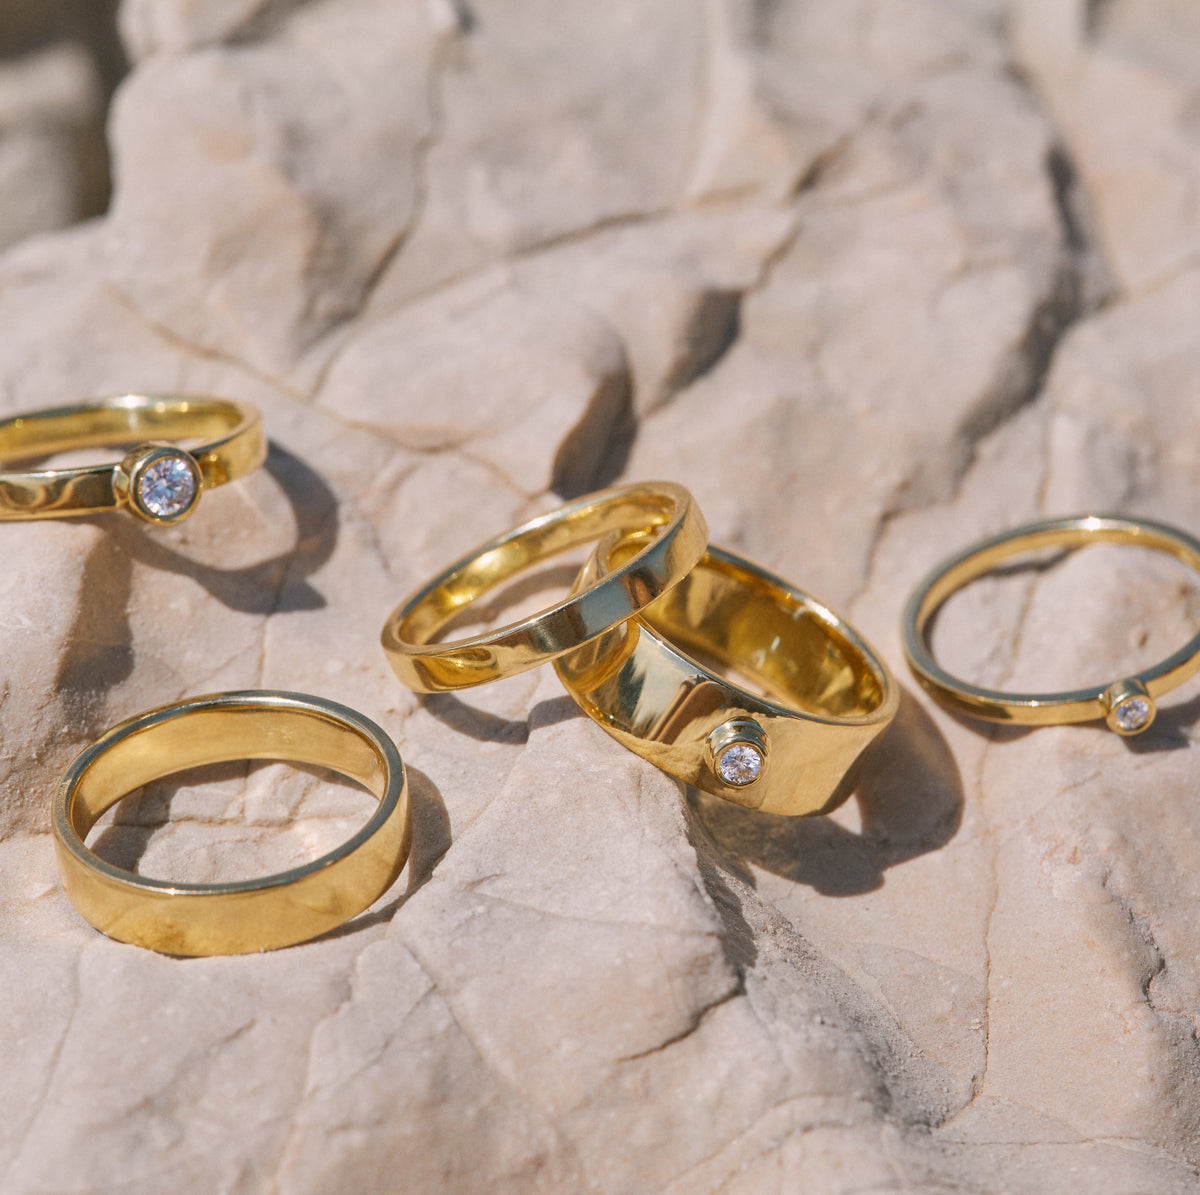 Agapè 6.04 ring in Fairmined gold